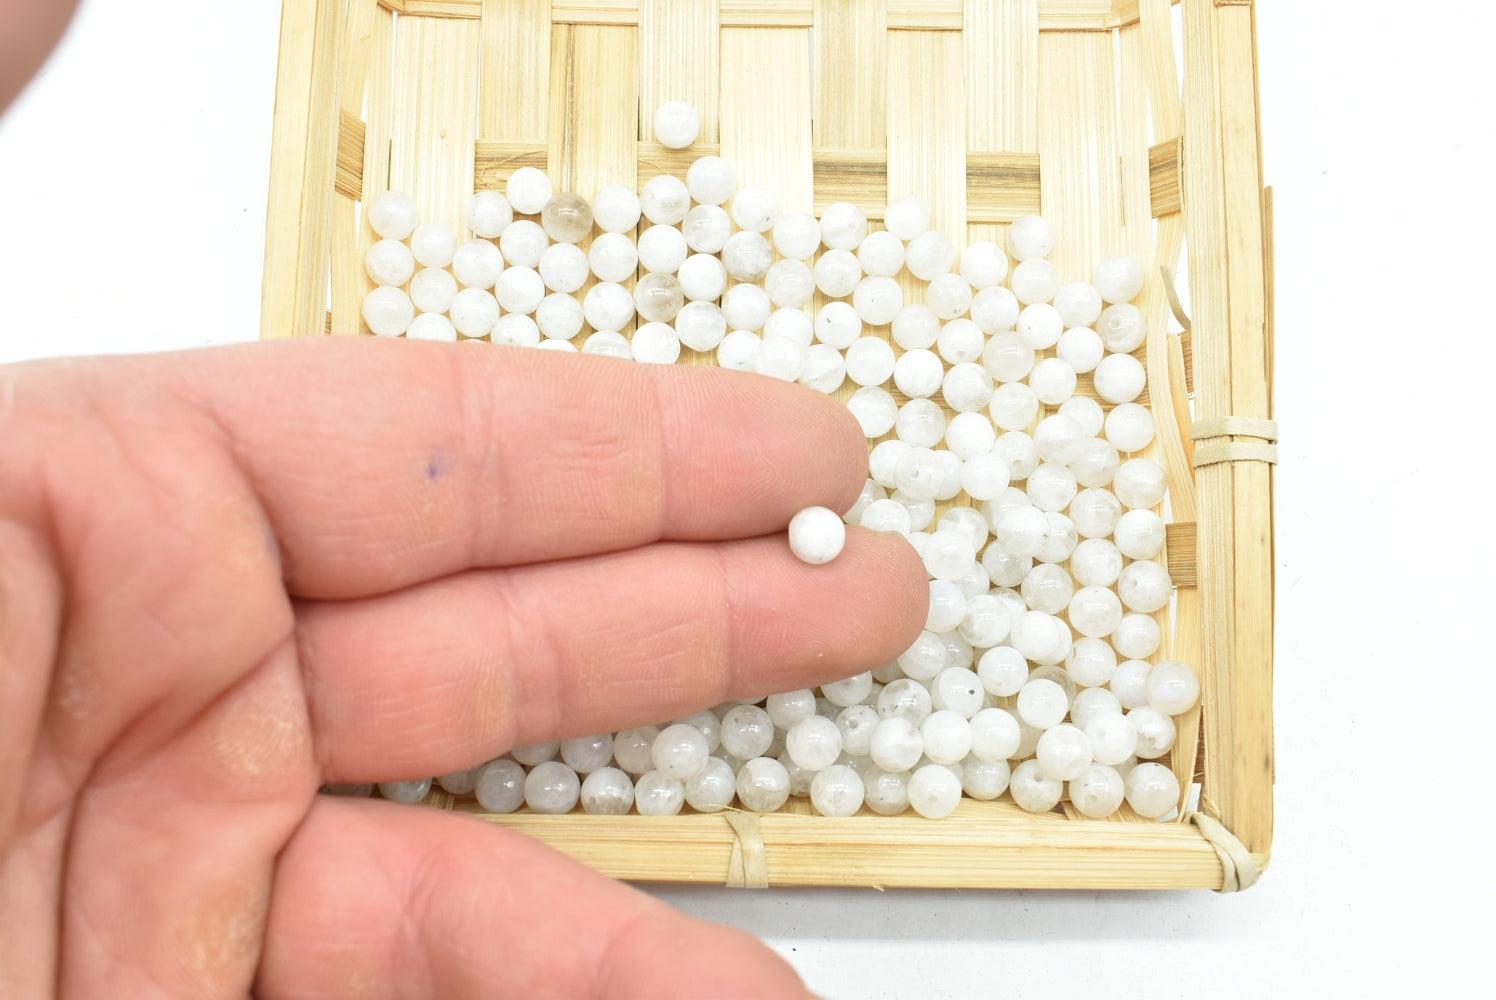 Moonstone Beads 6 mm Perforated - 5 Beads